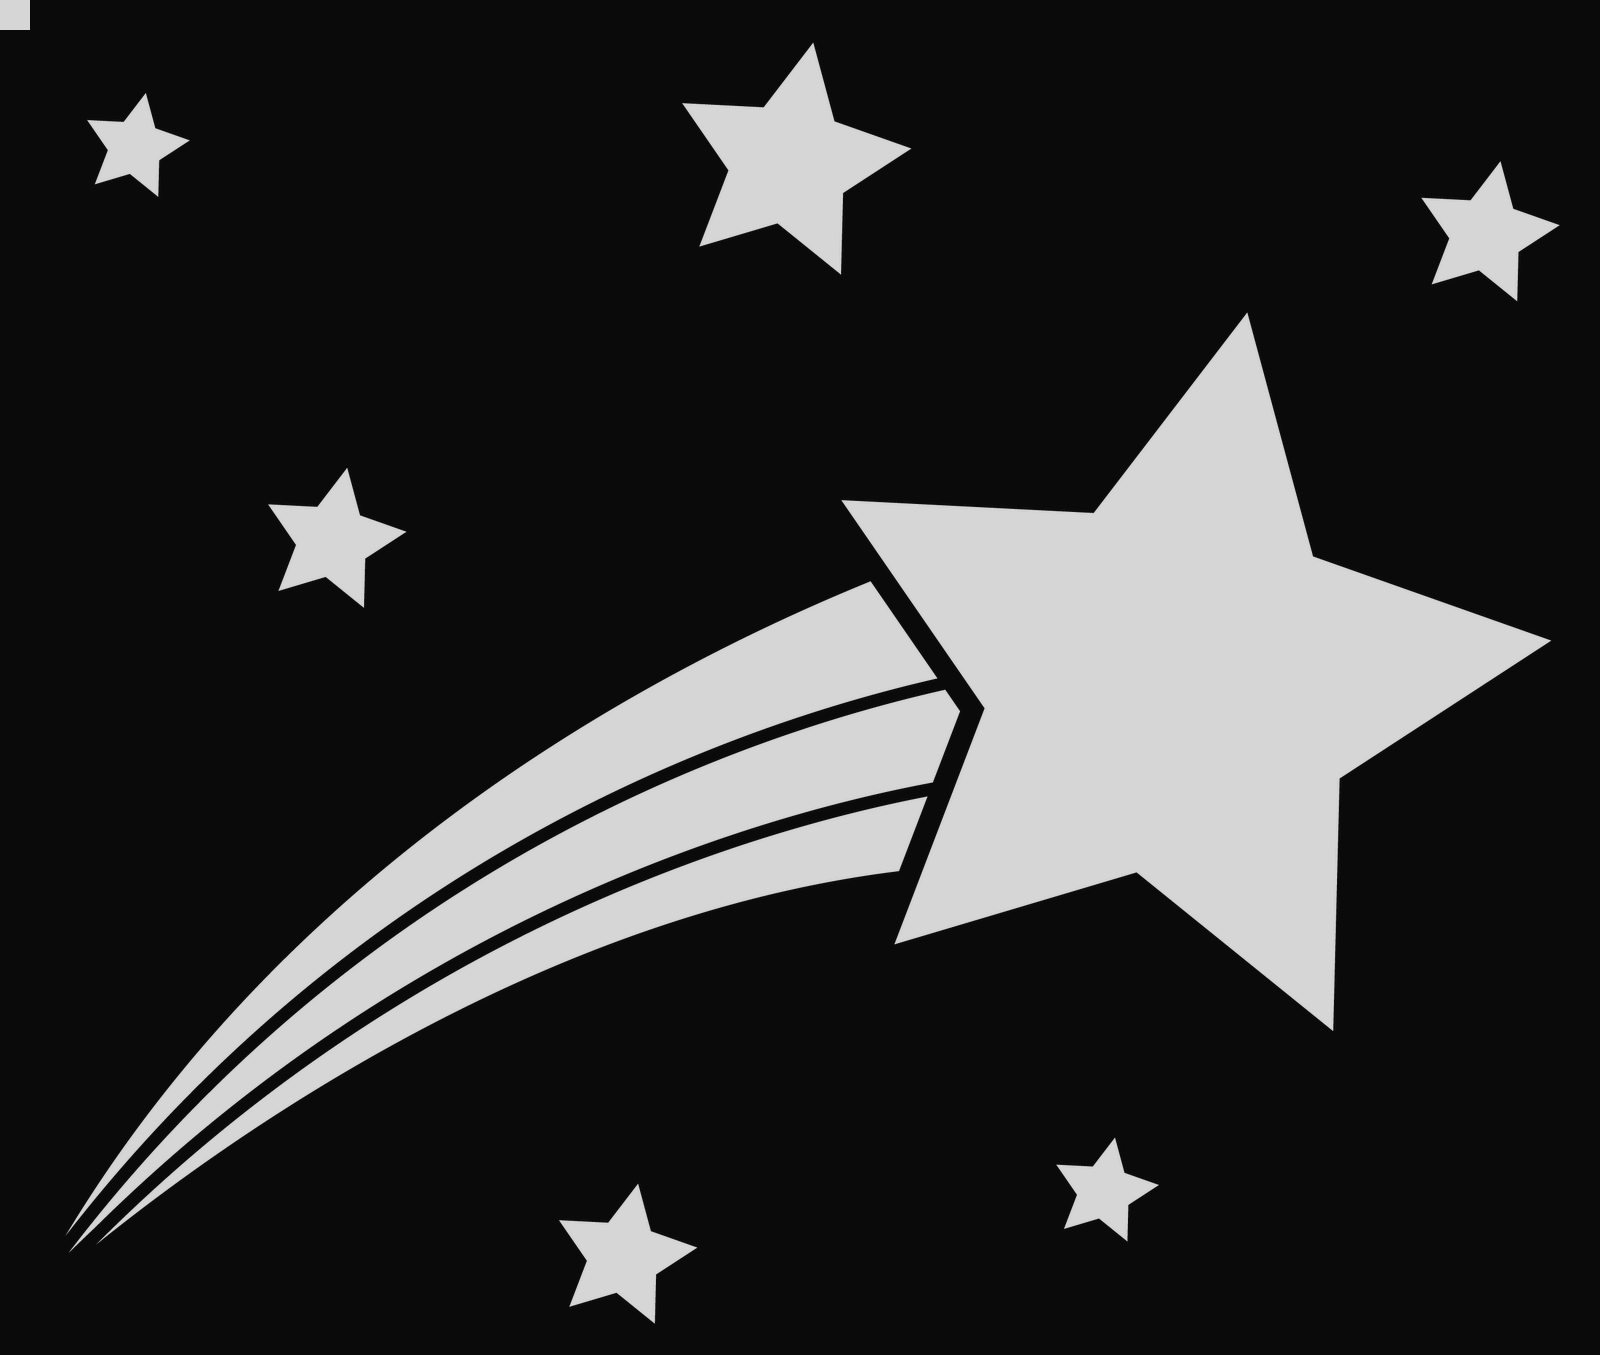 Shooting Star Clip Art Black And White Black And White - B612 Camera Download (1600x1355)